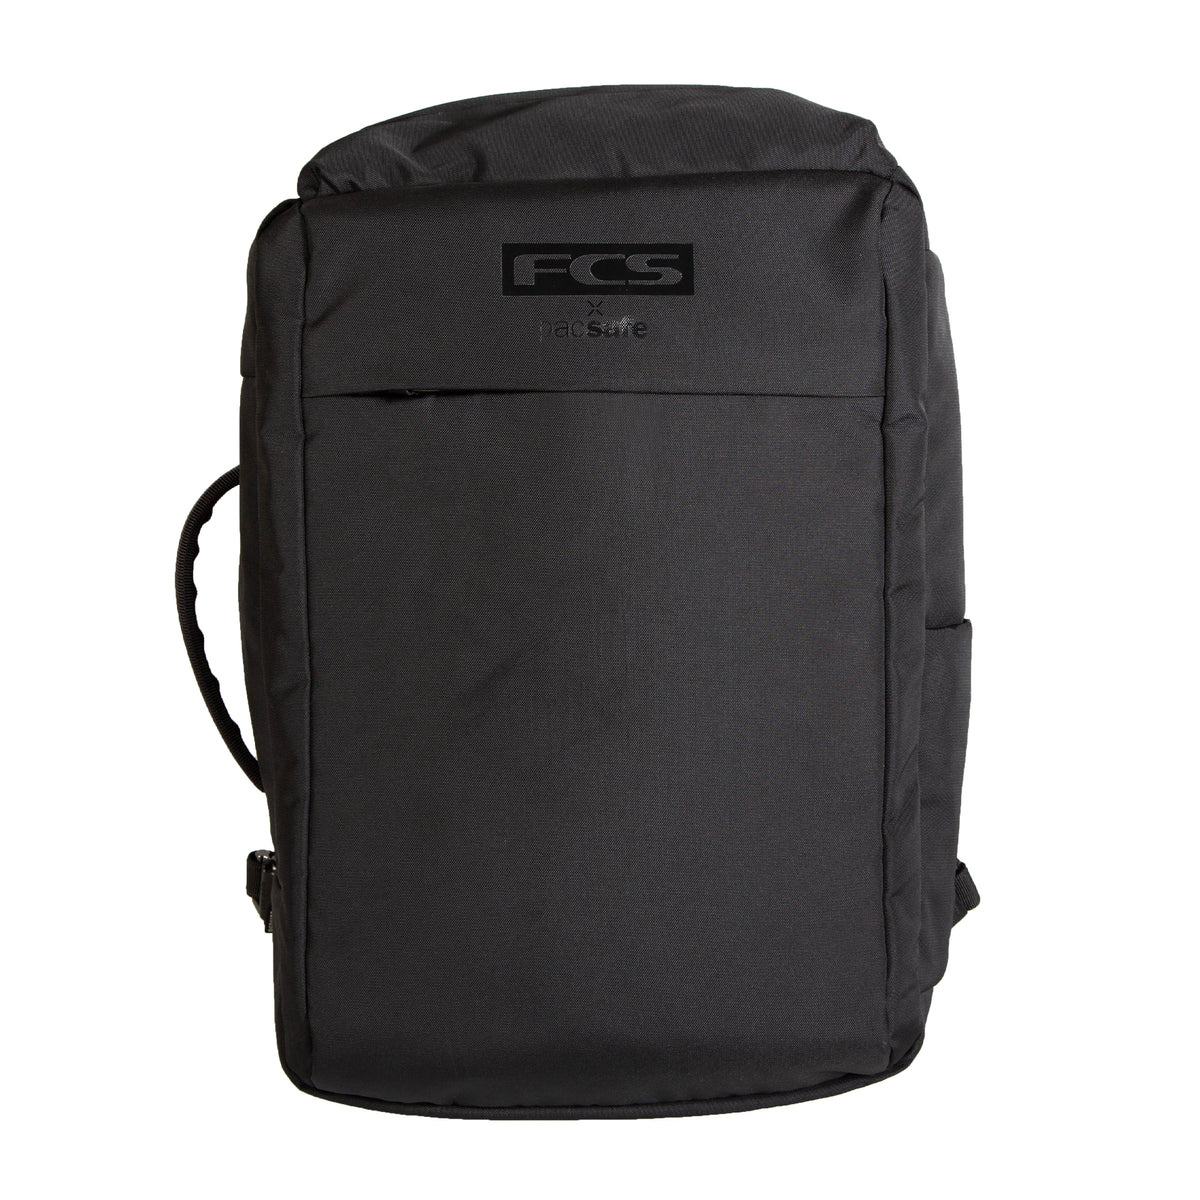 DAY MISSION 28 L BACKPACK